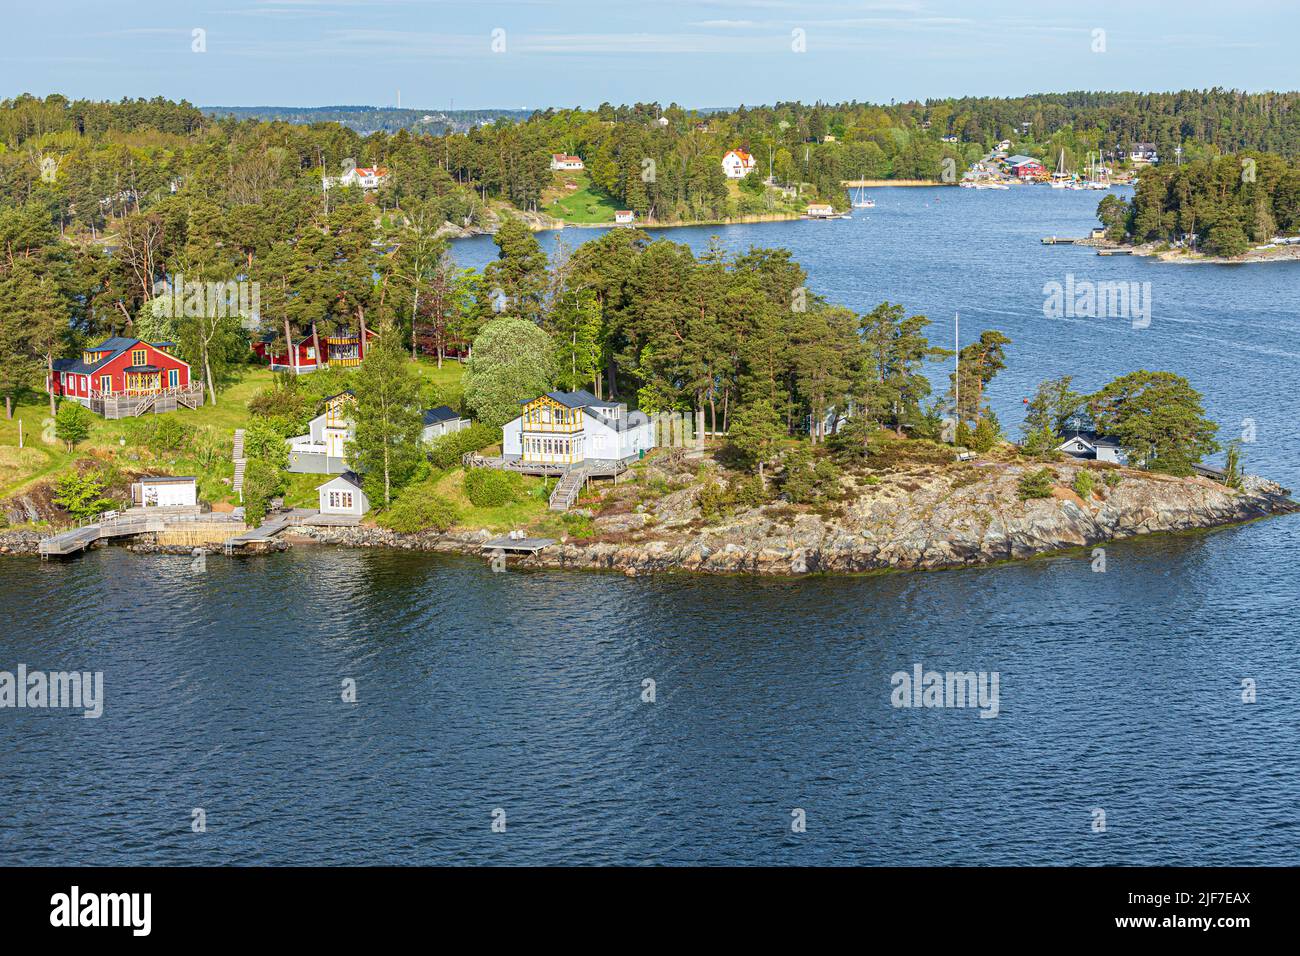 Traditional buildings on one of the many islands of the Stockholm Archipelago - this one is Skogson, Sweden Stock Photo